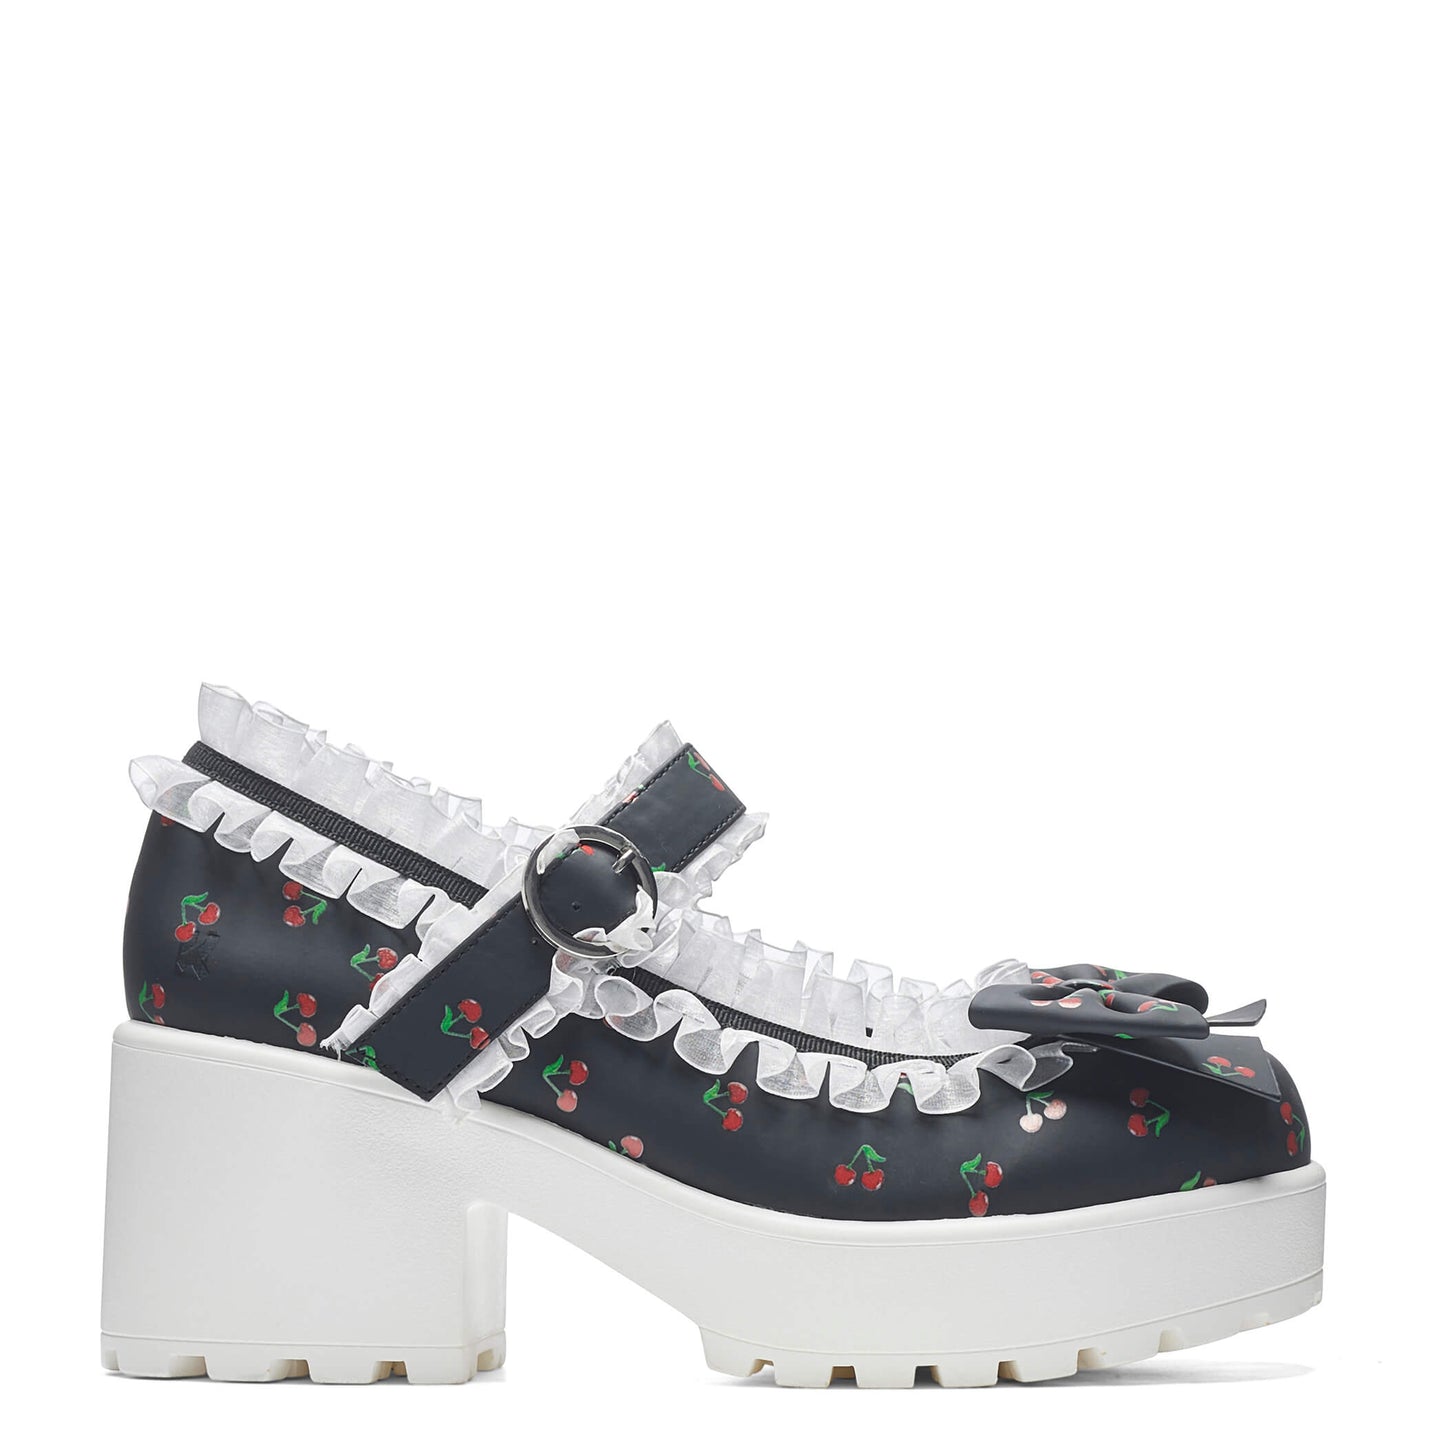 Tira Mary Janes Shoes 'Black Cherry Bakewell Edition' - Mary Janes - KOI Footwear - Black - Side View